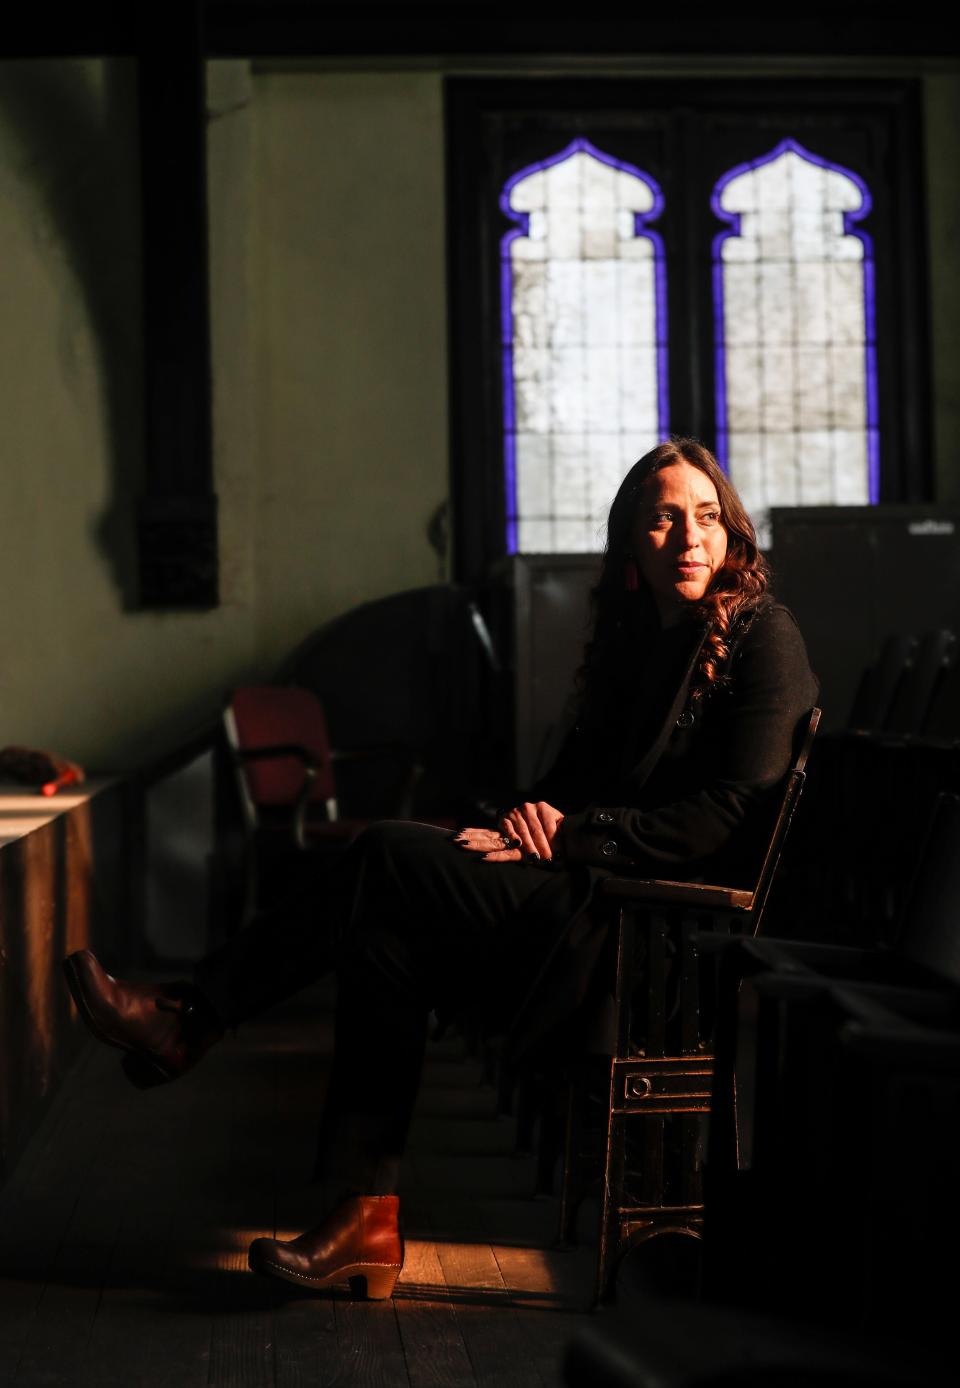 Sitting atop the choir section, Star Auerbach, project developer has plans for a airbnb-style boutique hotel at the former Highland United Methodist Church. Guests would check-in themselves, though help and services will easily reached by phone. The location of the church is walkable to the dozens of restaurants, shops and bars on Bardstown Road.